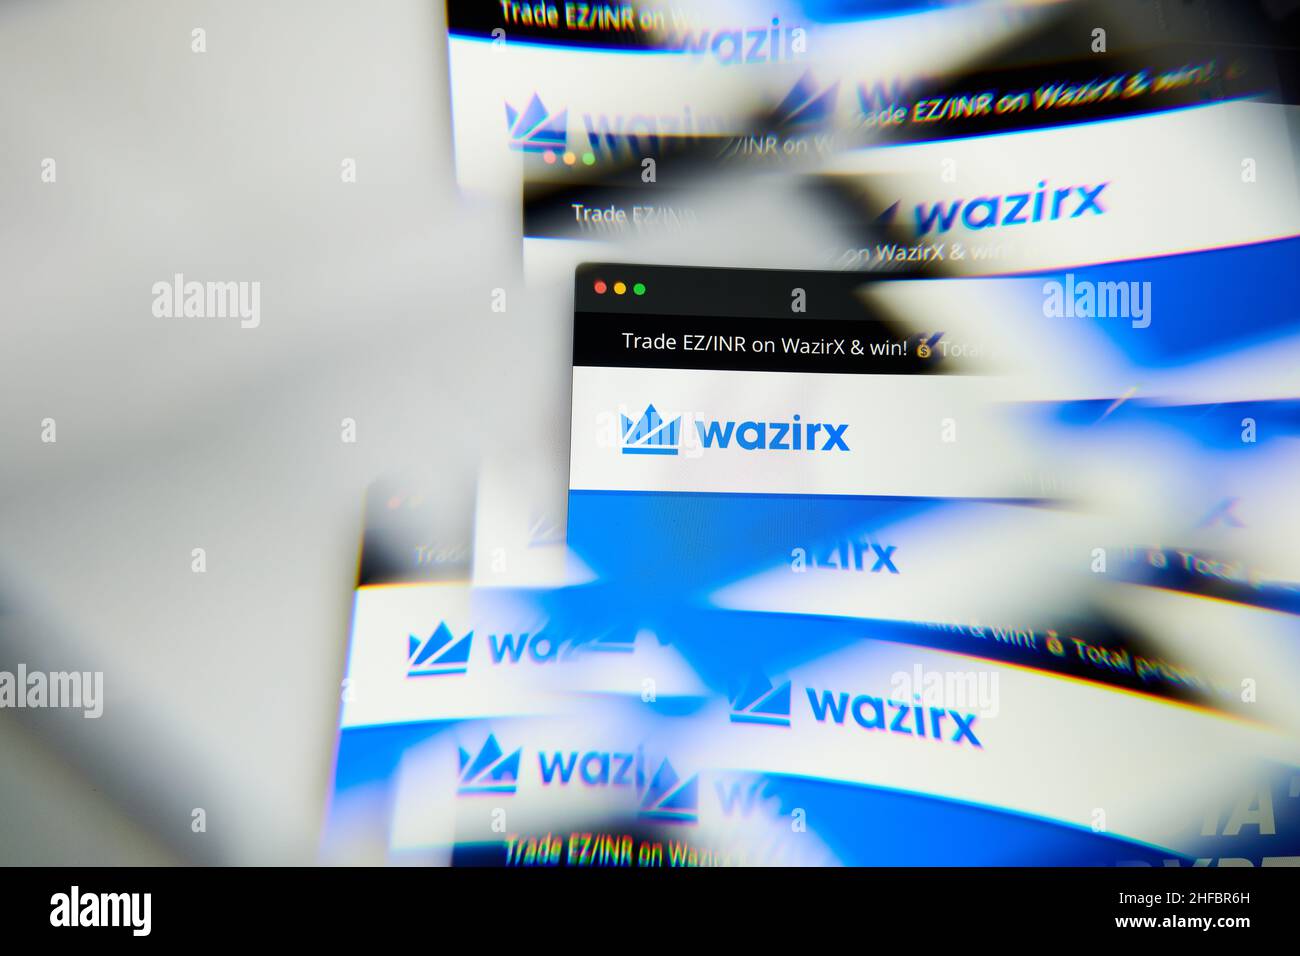 Milan, Italy - January 11, 2022: wazirx - WRX logo on laptop screen seen through an optical prism. Dynamic and unique image form wazirx, WRX coin webs Stock Photo